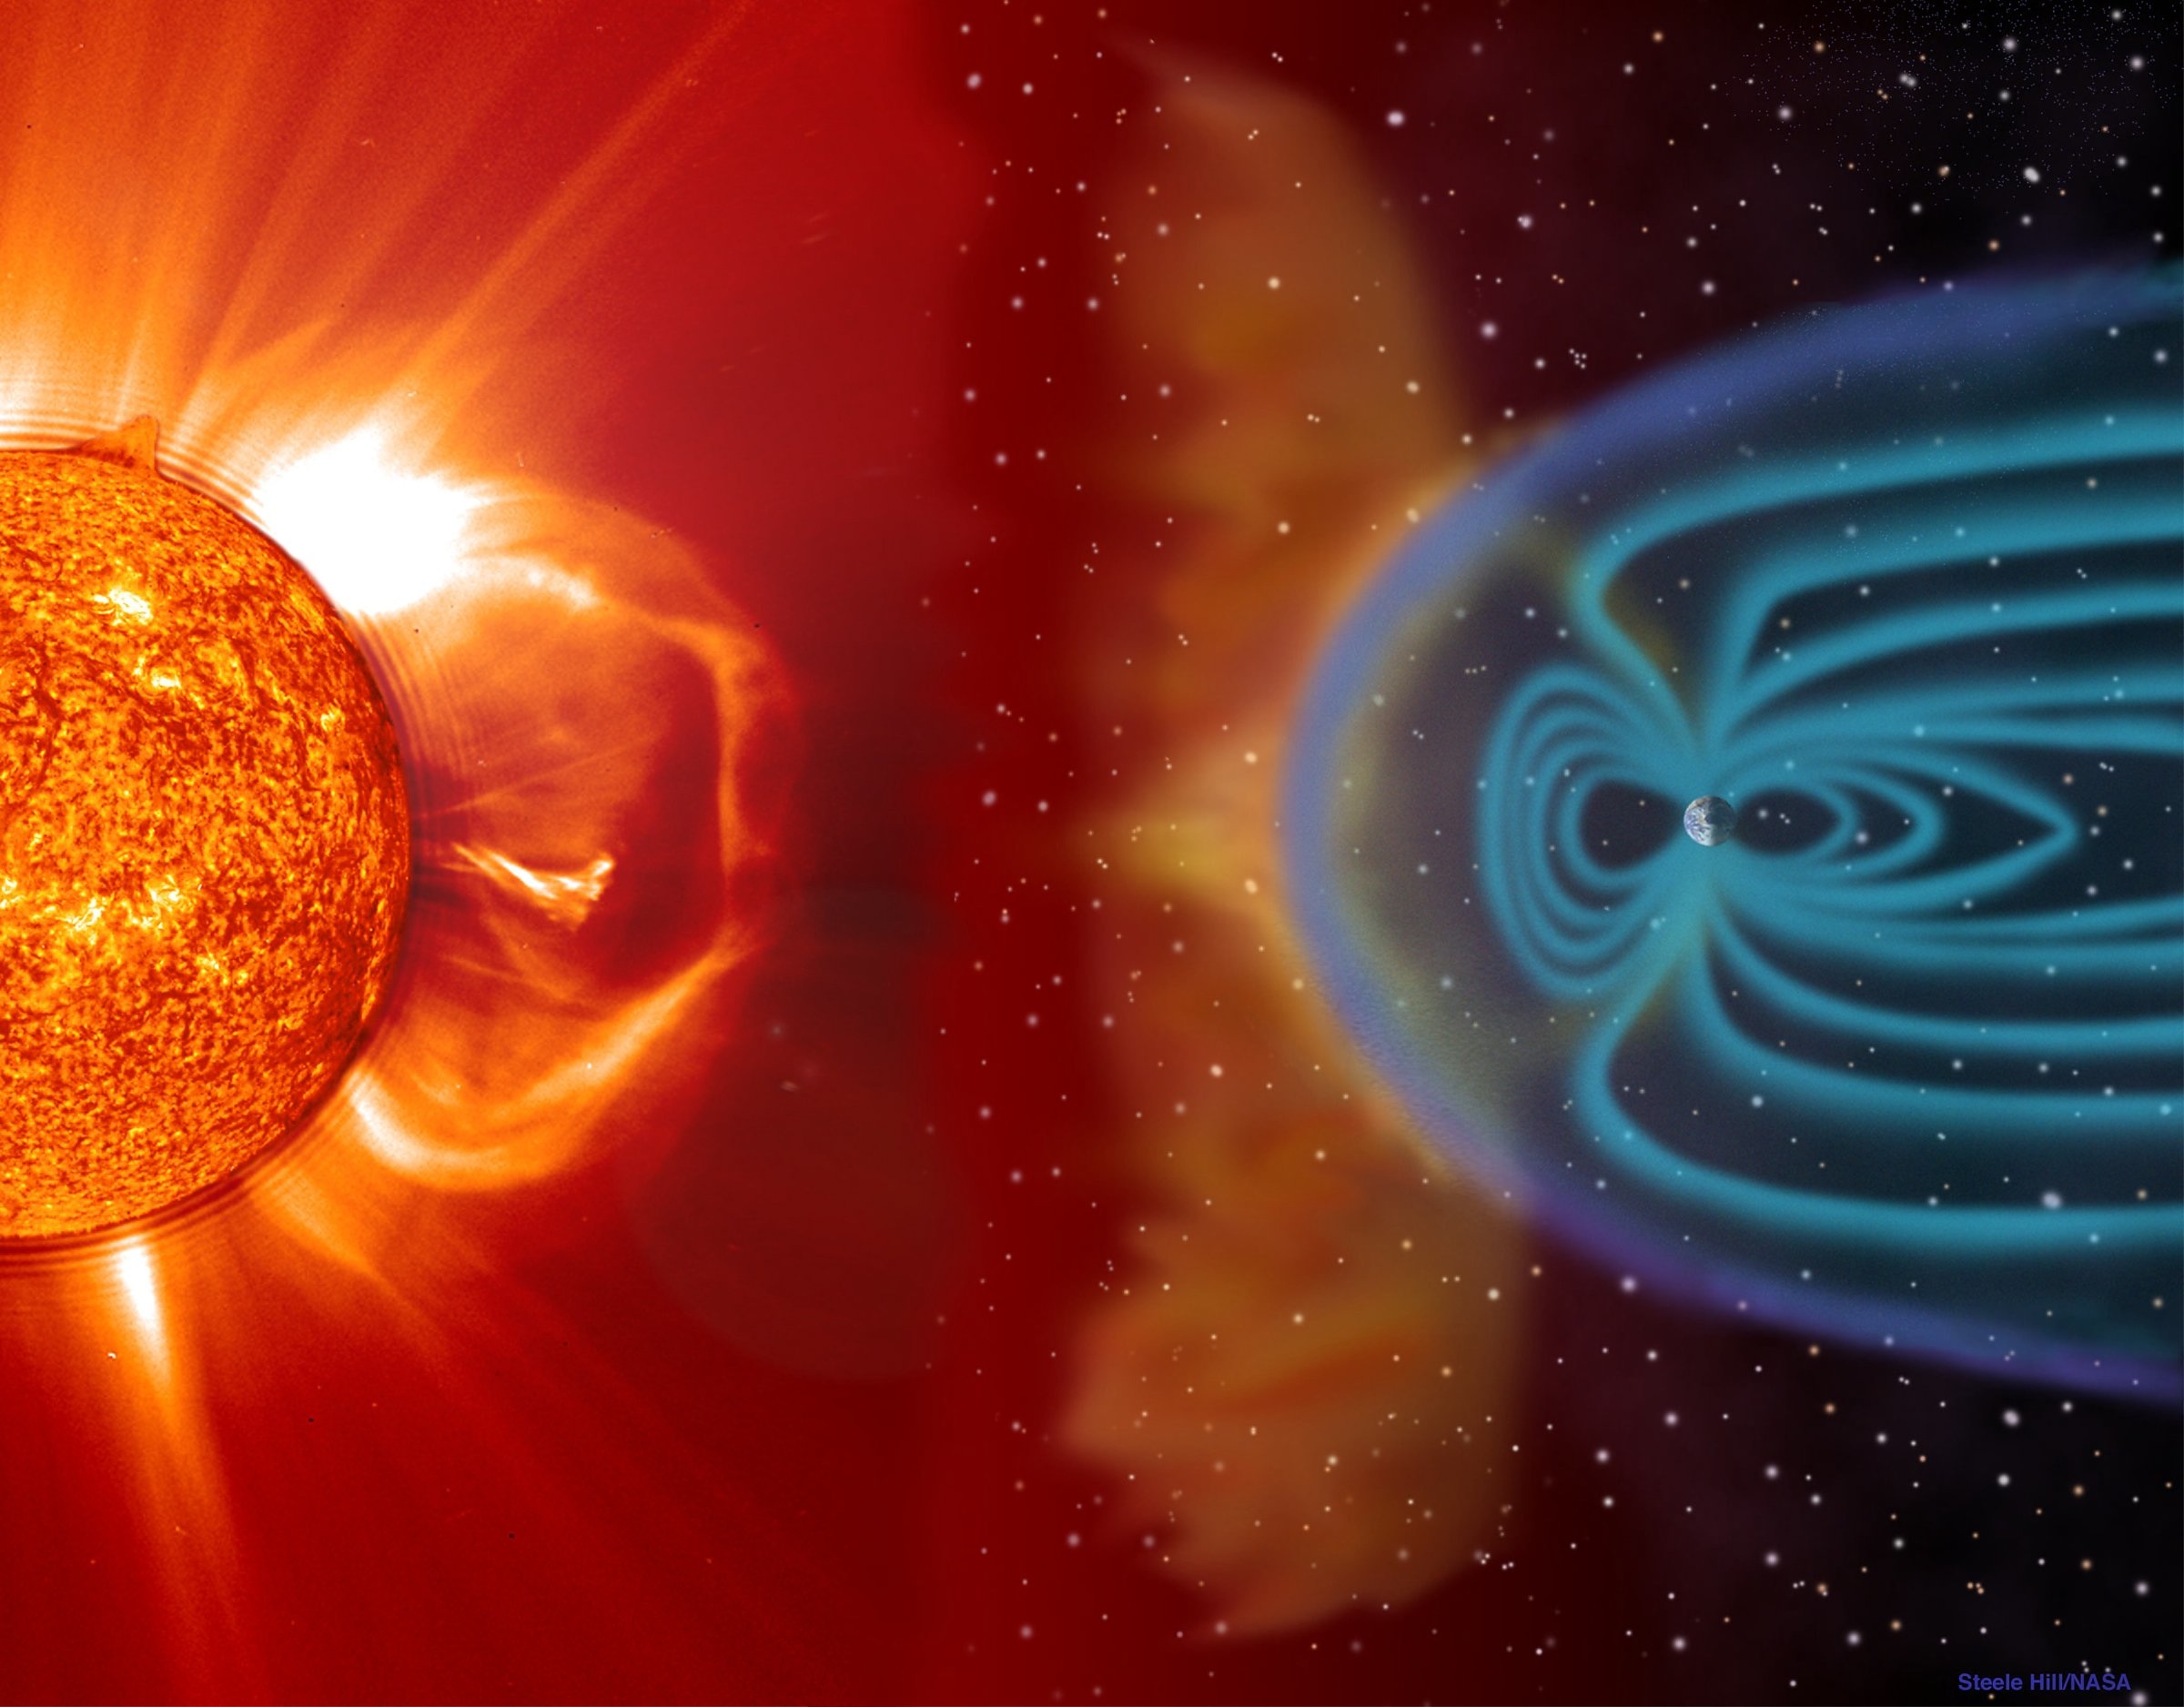 1 In 8 Chance Of A GridCrippling Solar Storm In The Next Decade? Off